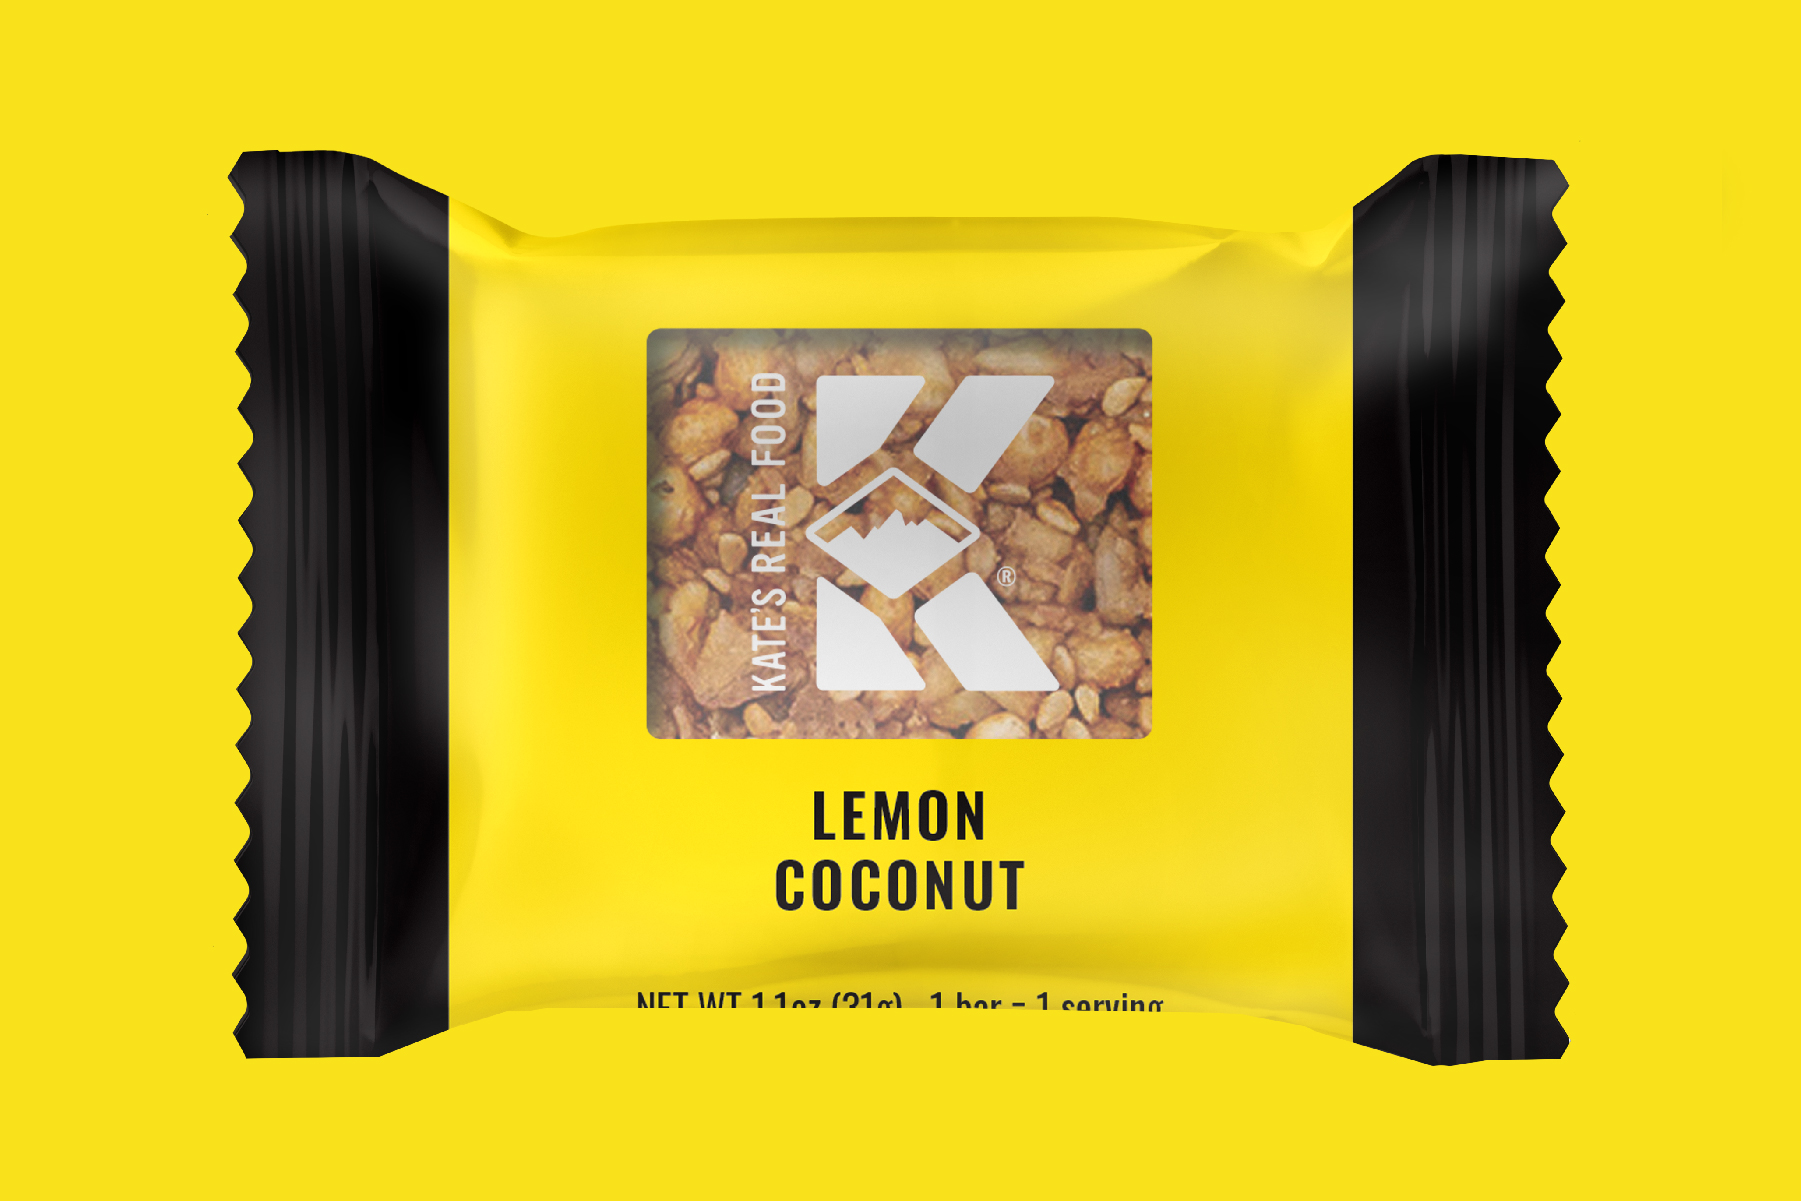 Starting in August, customers in all cabins will enjoy Lemon Coconut bars from Kate’s Real Food